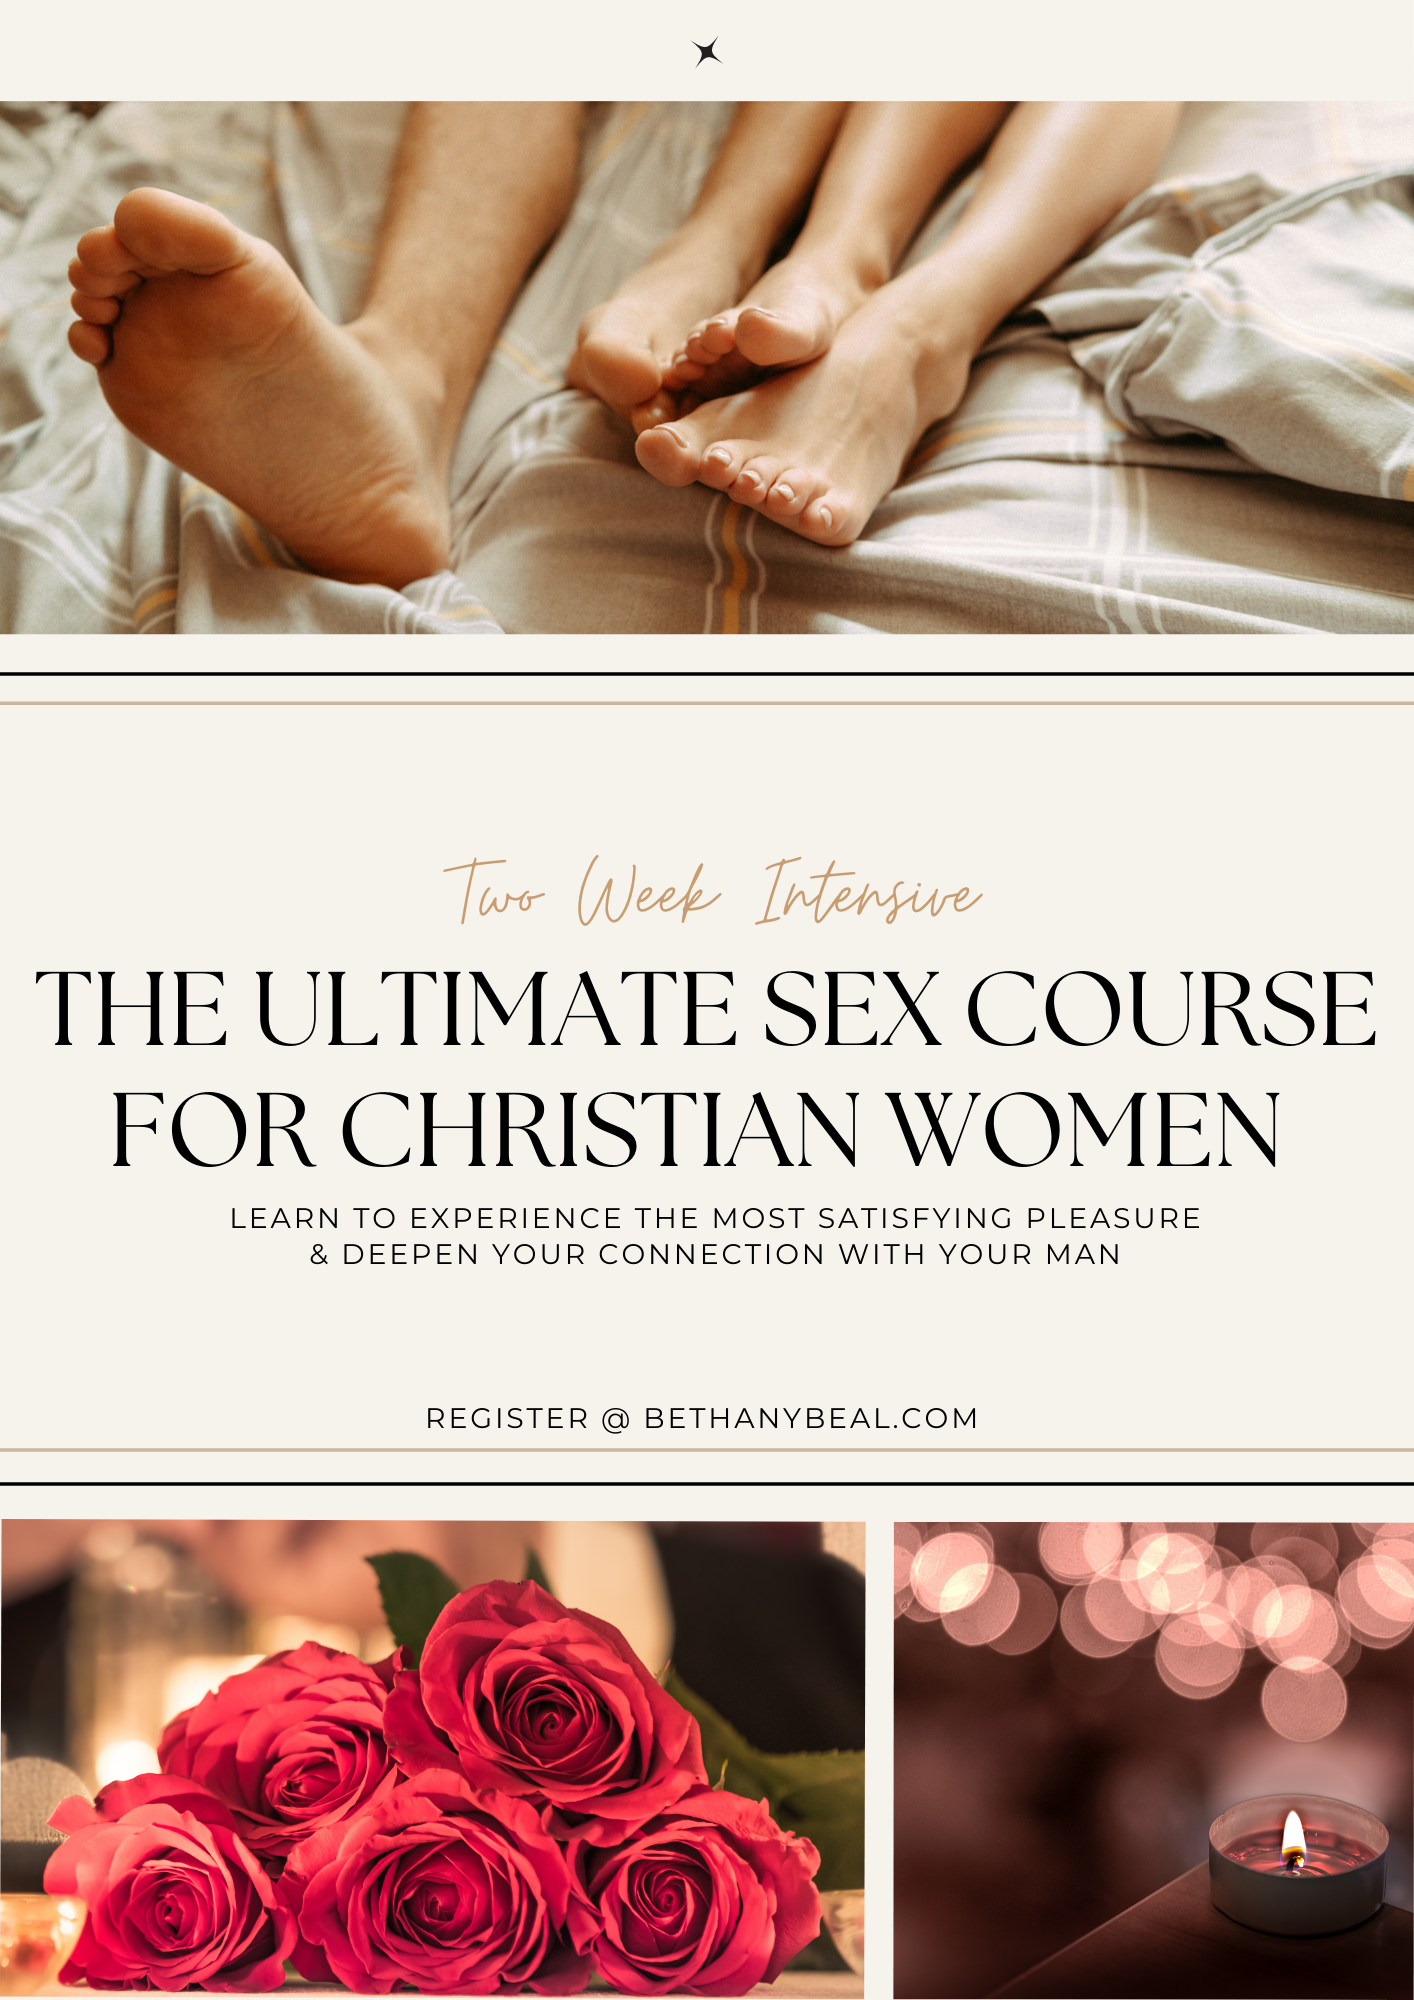 The Ultimate Sex Course for Christian Women image